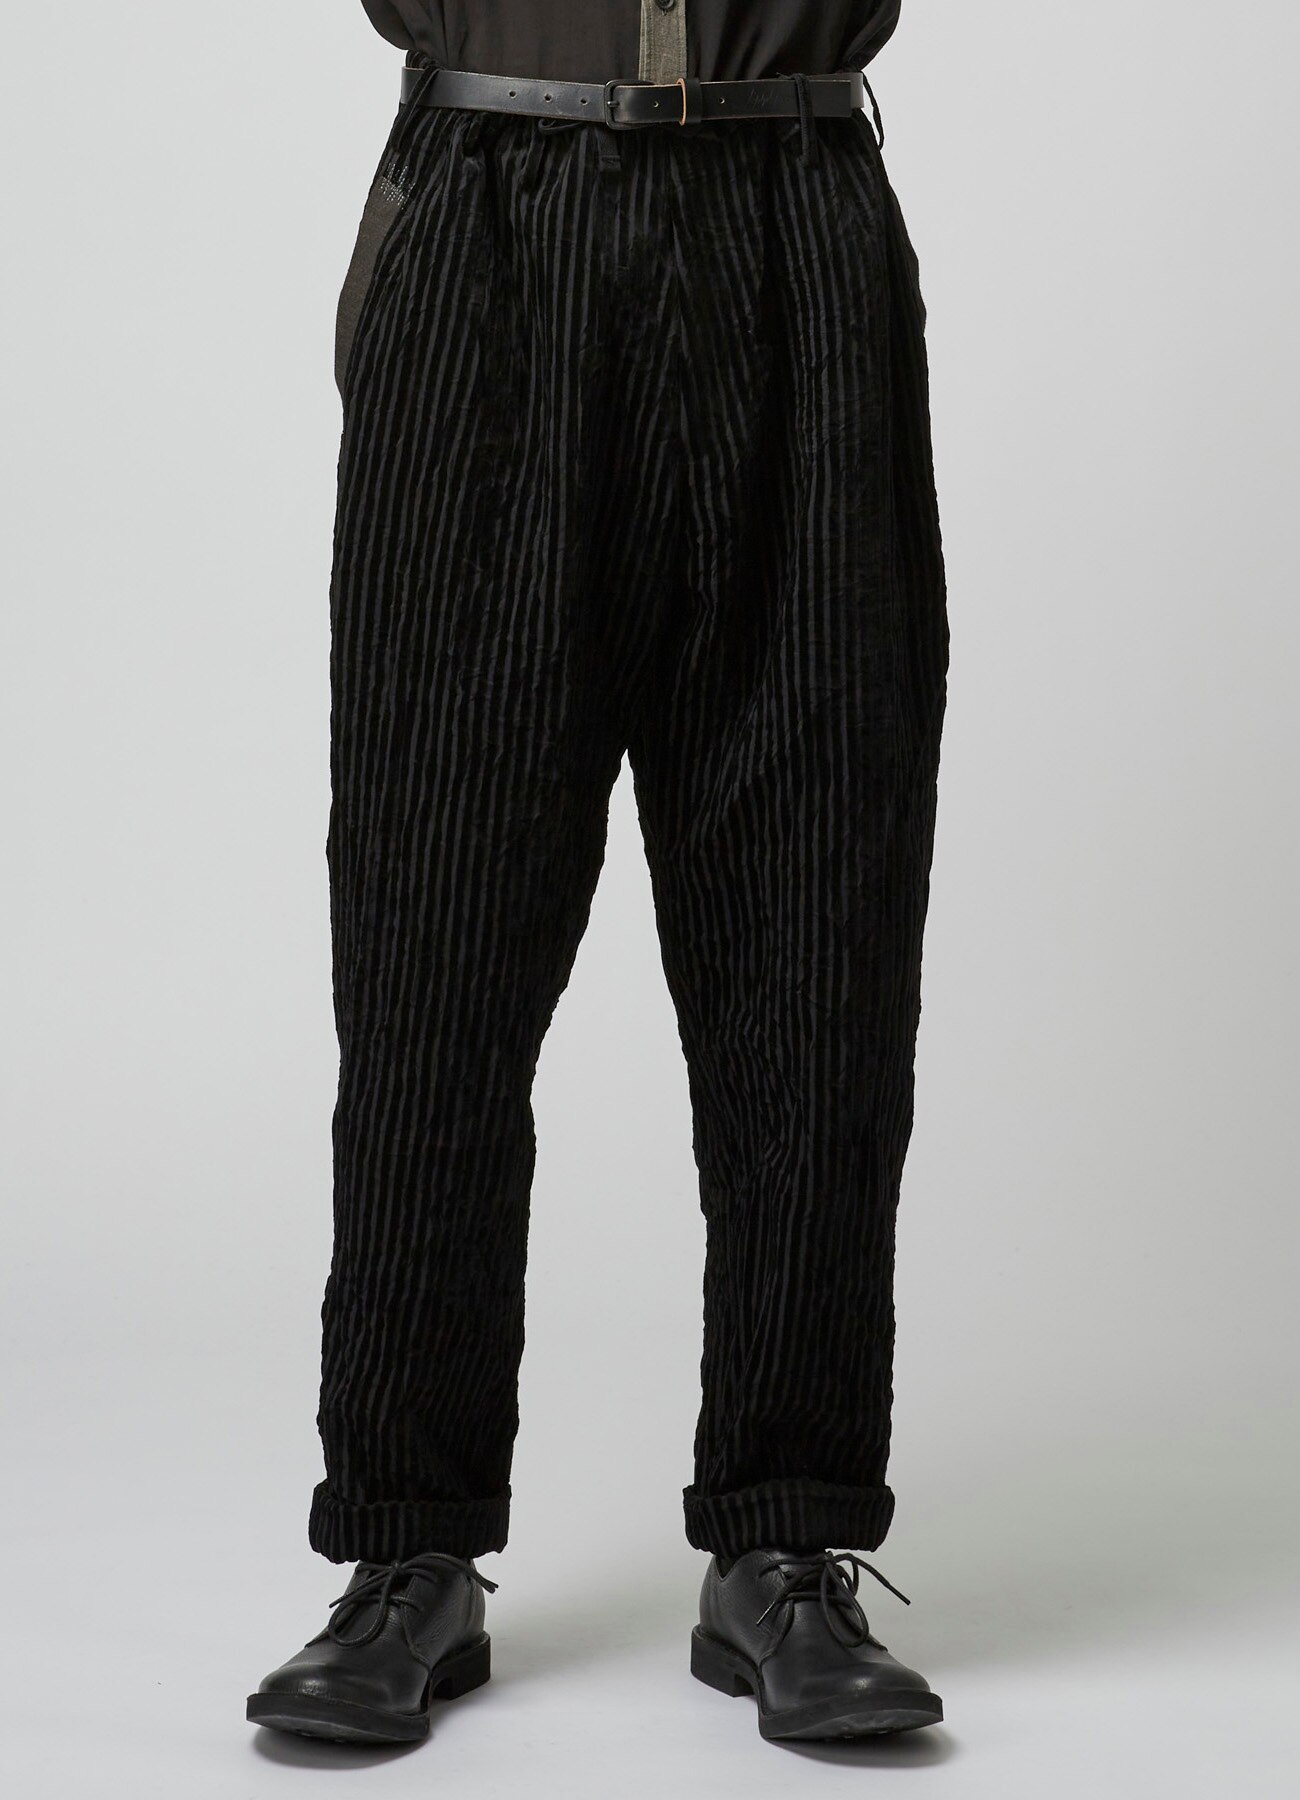 WRINKLED STRIPED PANTS WITH DRAWSTRING